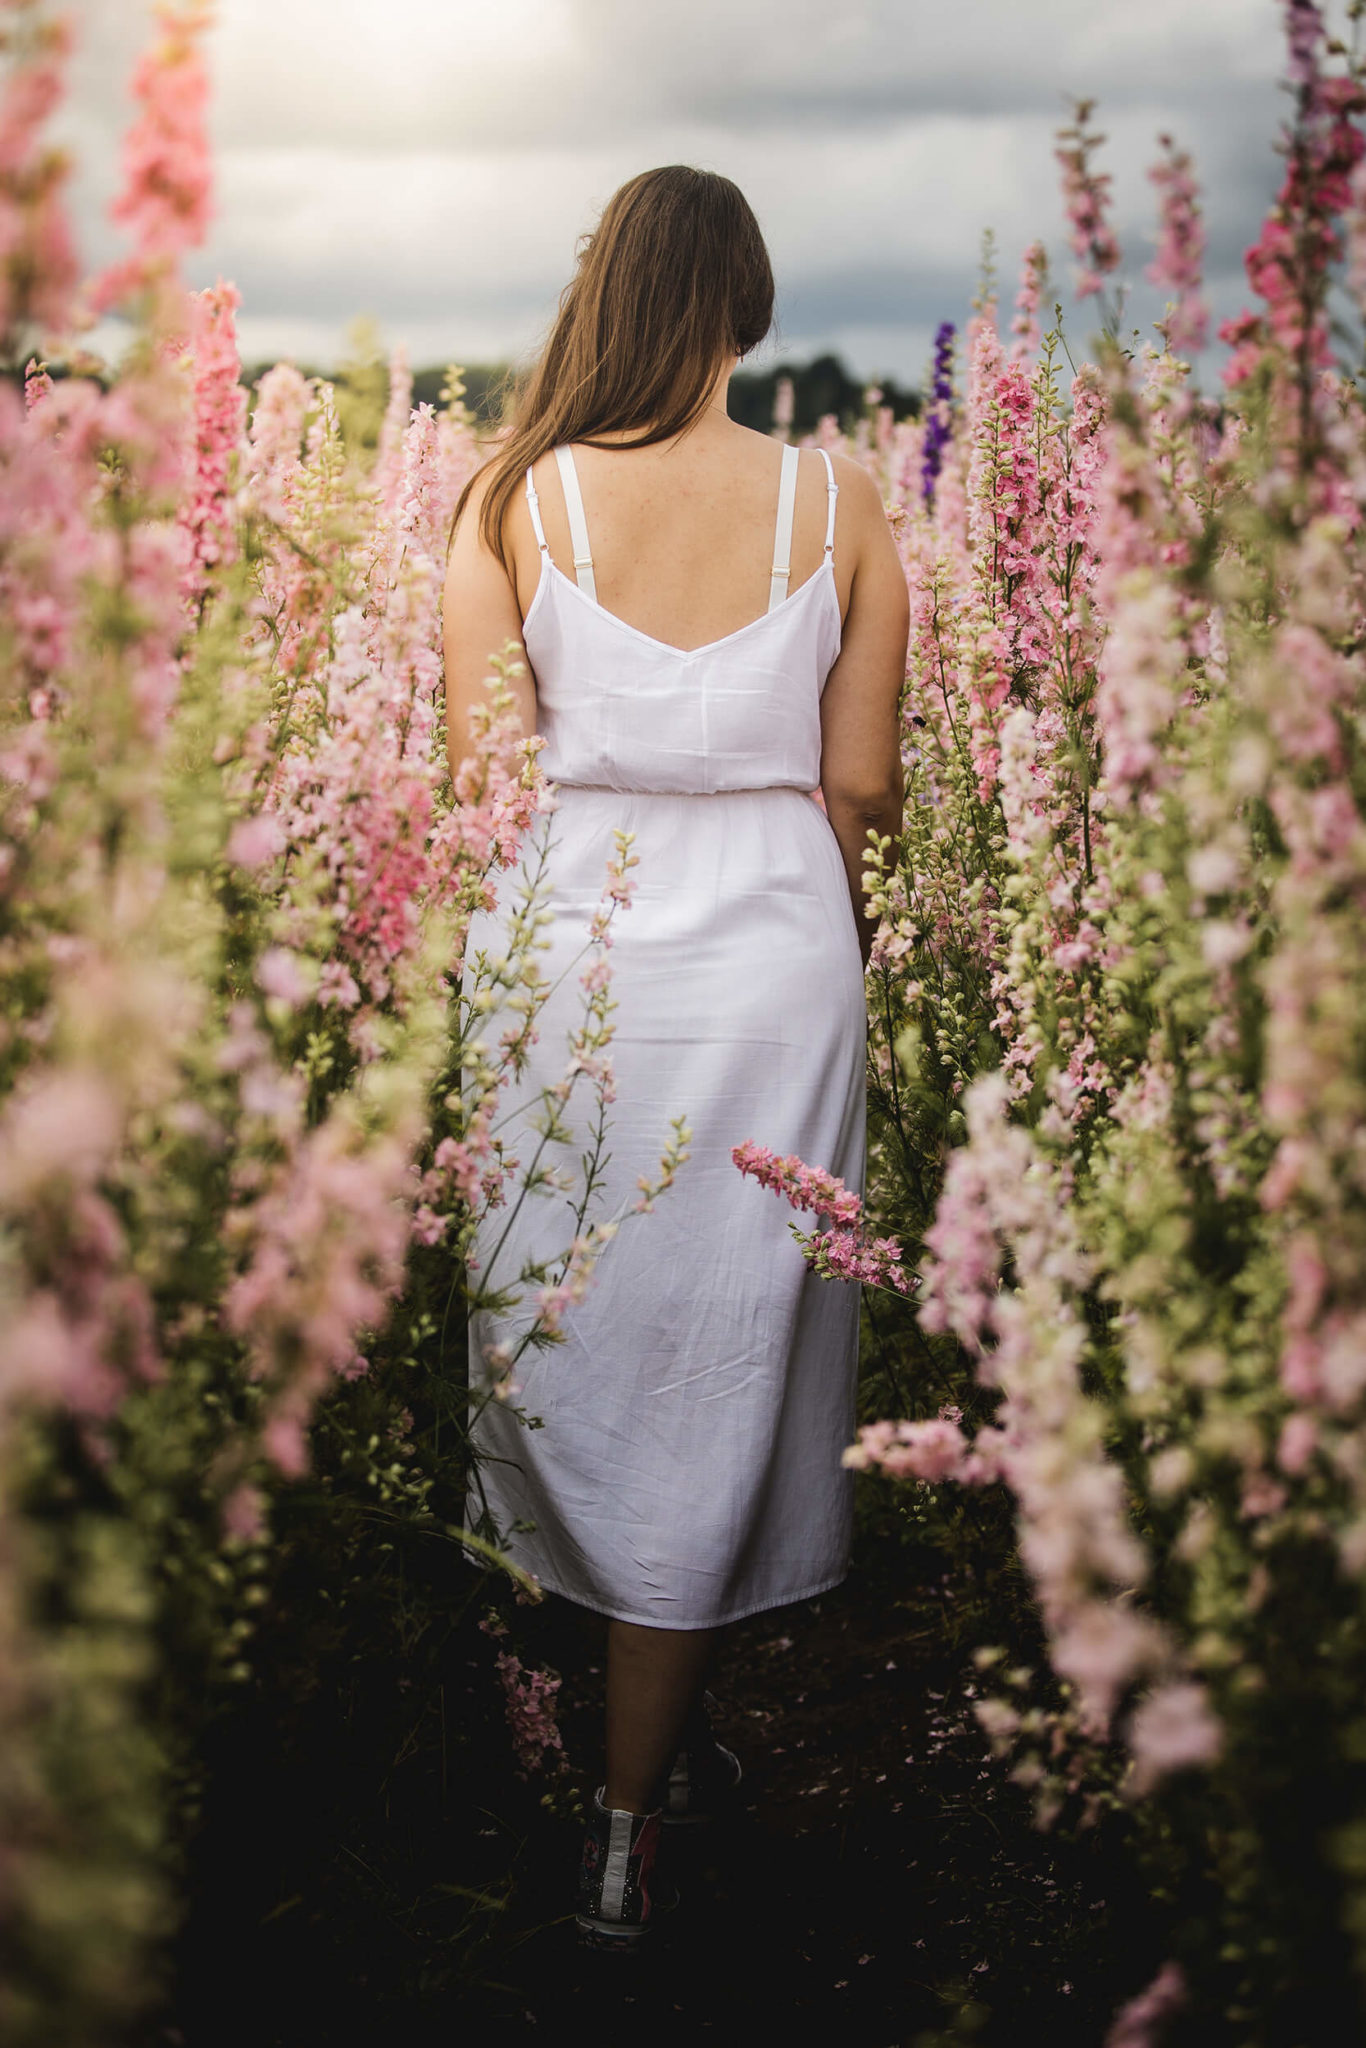 Woman in white dress walking away from camera in a field of pink delphiniums